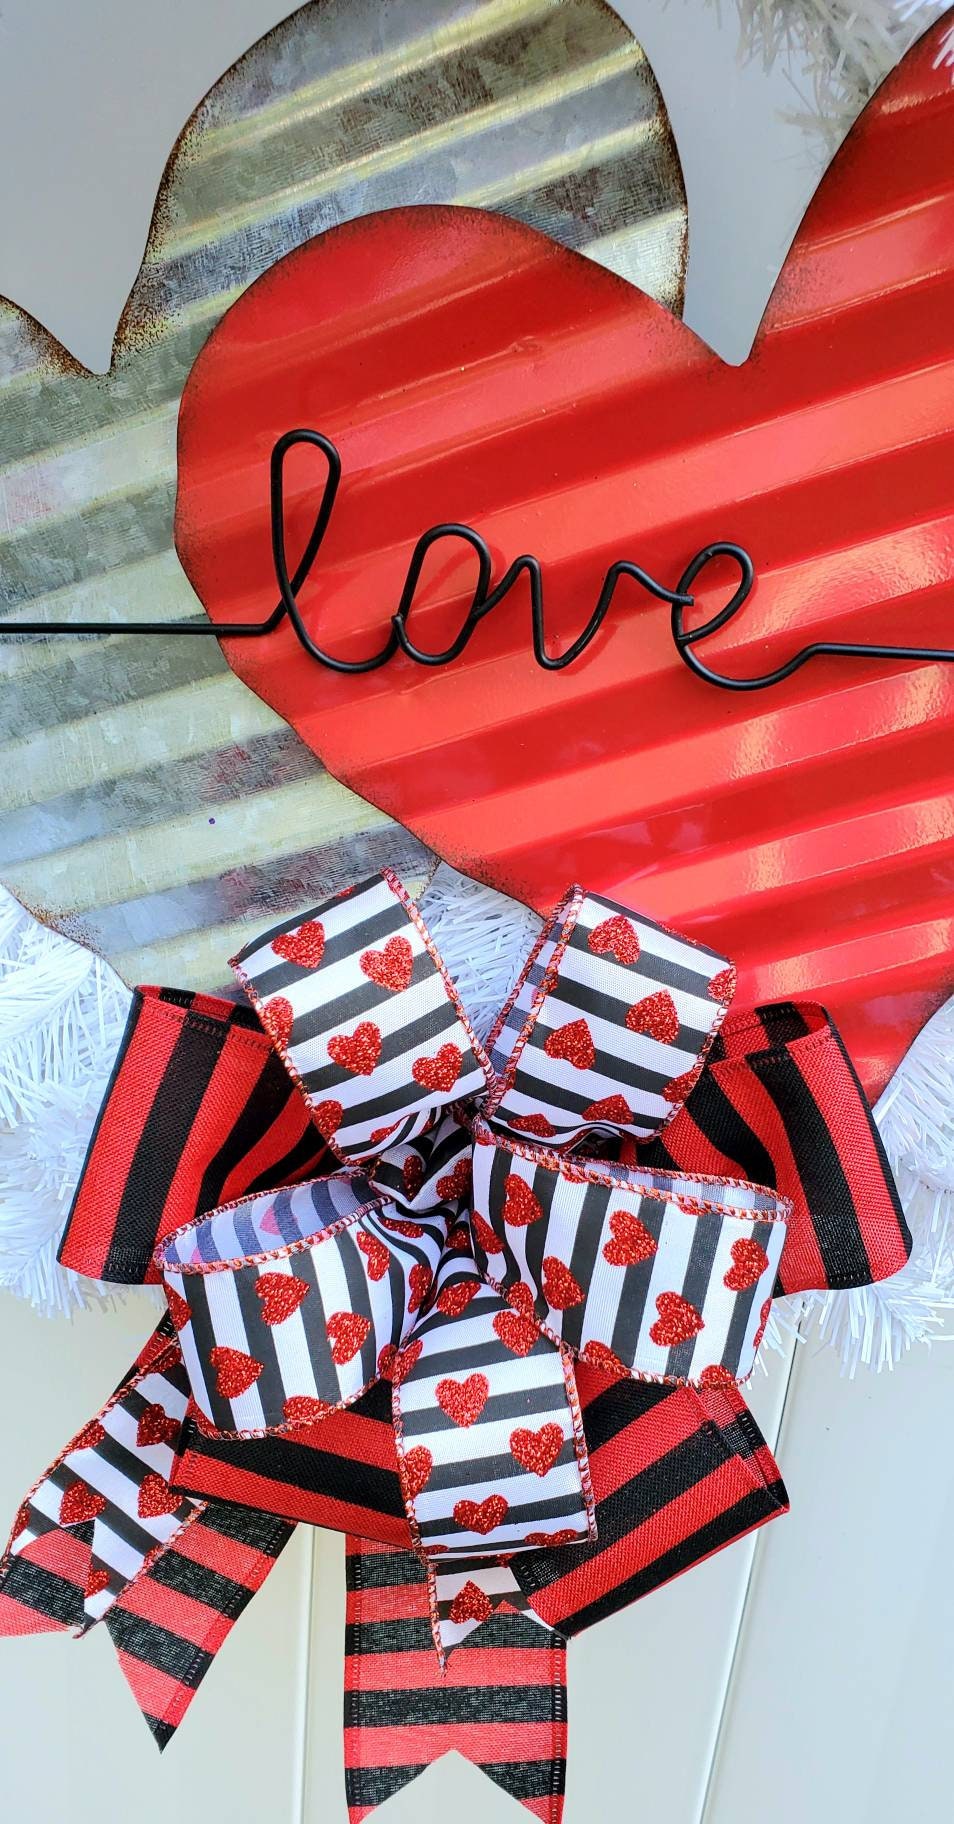 Excited to share this item from my # shop: Valentines Day Wreath Front  Door Heart Wreath Red Ro…